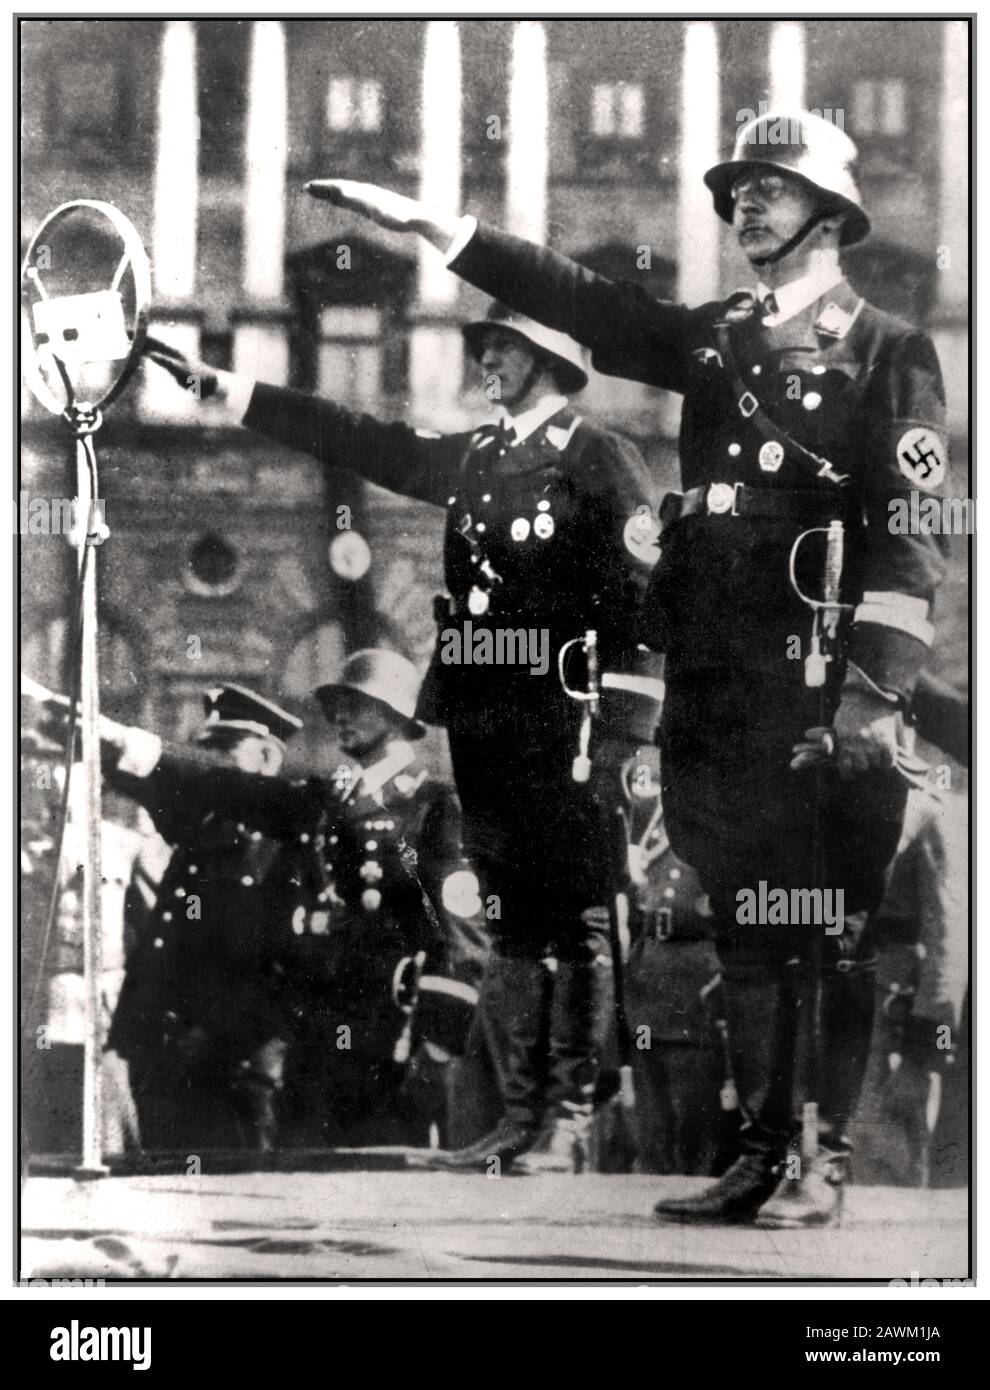 Pre WW2 1940's Heinrich Himmler Reichsfuhrer-SS German Nazi in full SS uniform wearing swastika armband, takes salute at a parade during Anchluss. Vienna Austria, March 17, 1938. Stock Photo